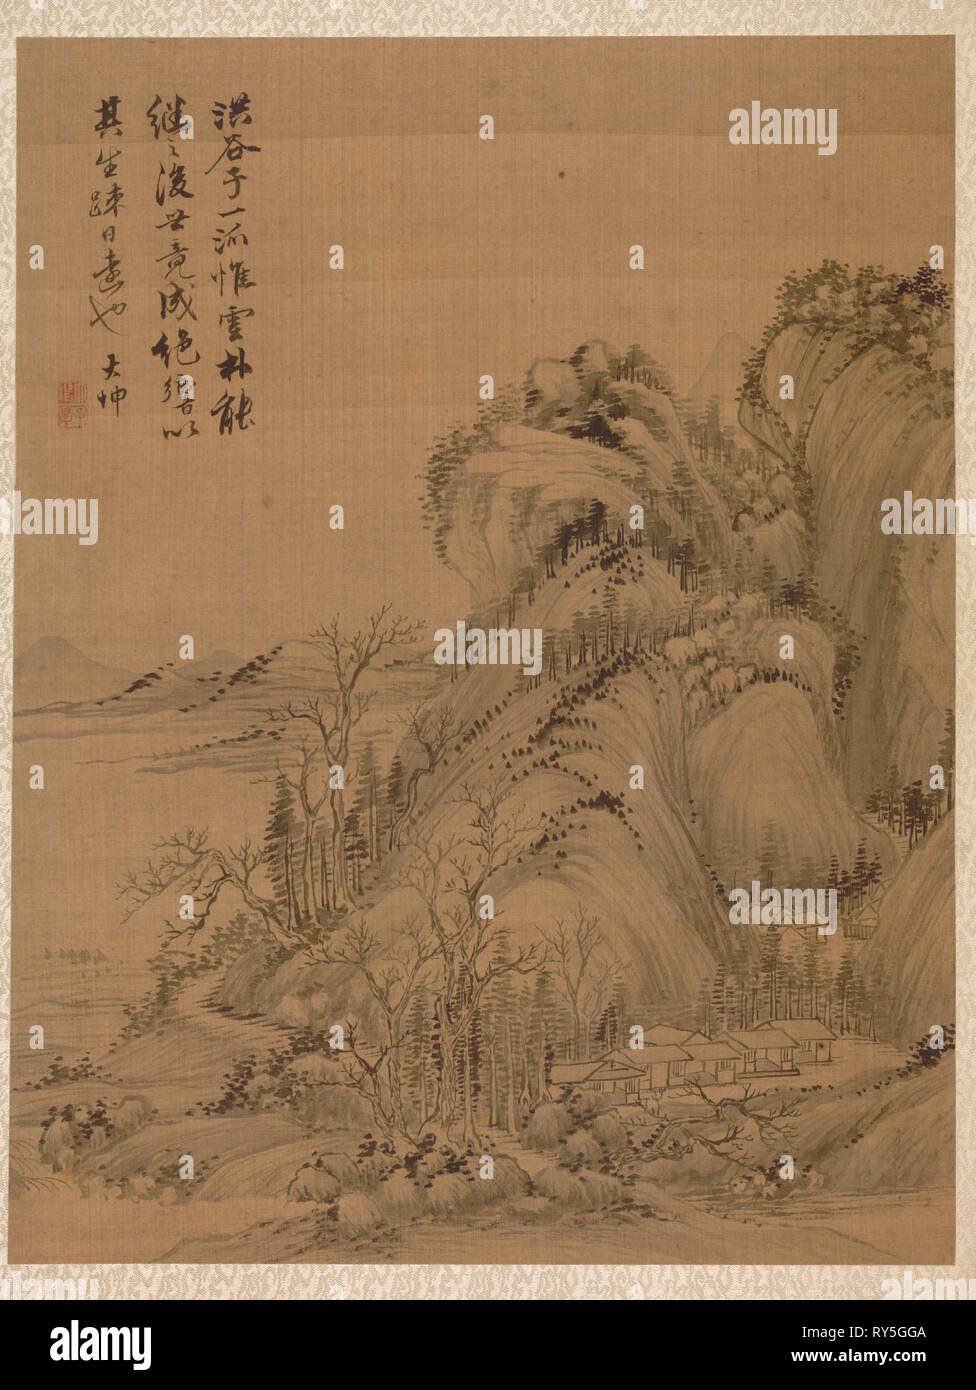 Landscape in the Style of Ching Hao, 1775. Zhai Dakun (Chinese, d. 1804). Album leaf: ink and color on silk; overall: 41.2 x 31.5 cm (16 1/4 x 12 3/8 in Stock Photo